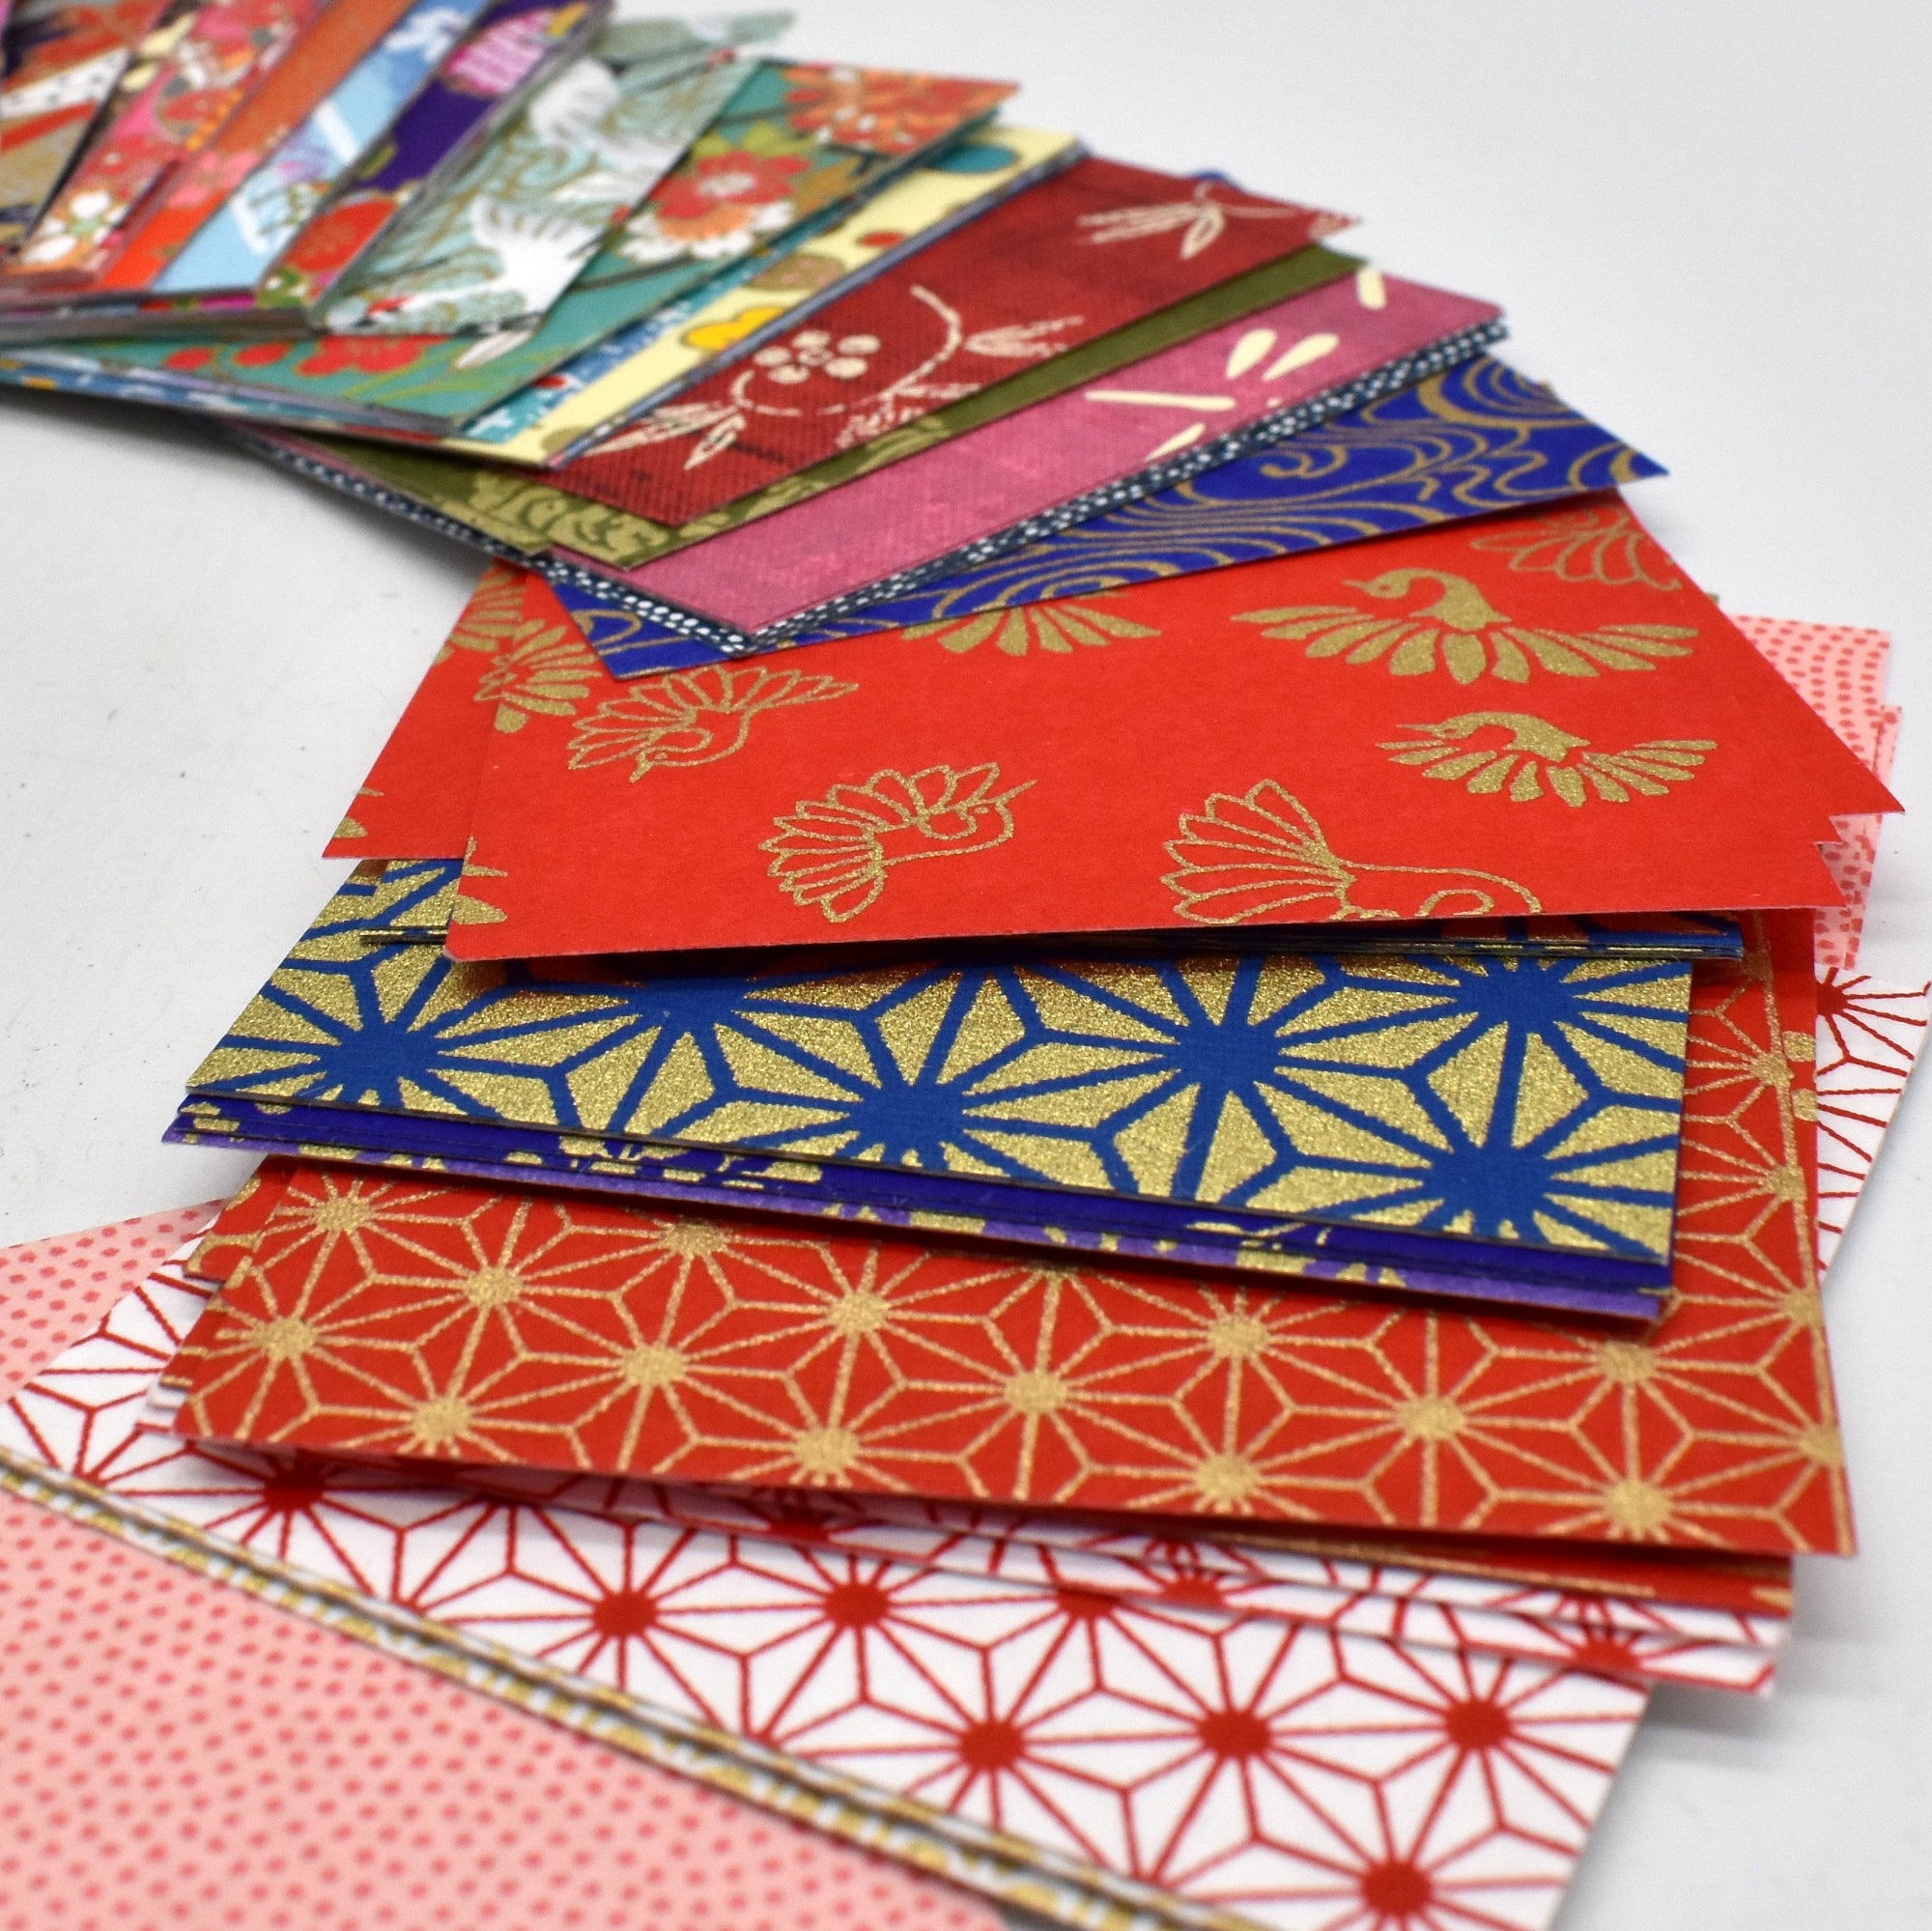 Origami Paper - Japanese Made Small Premium Washi Paper